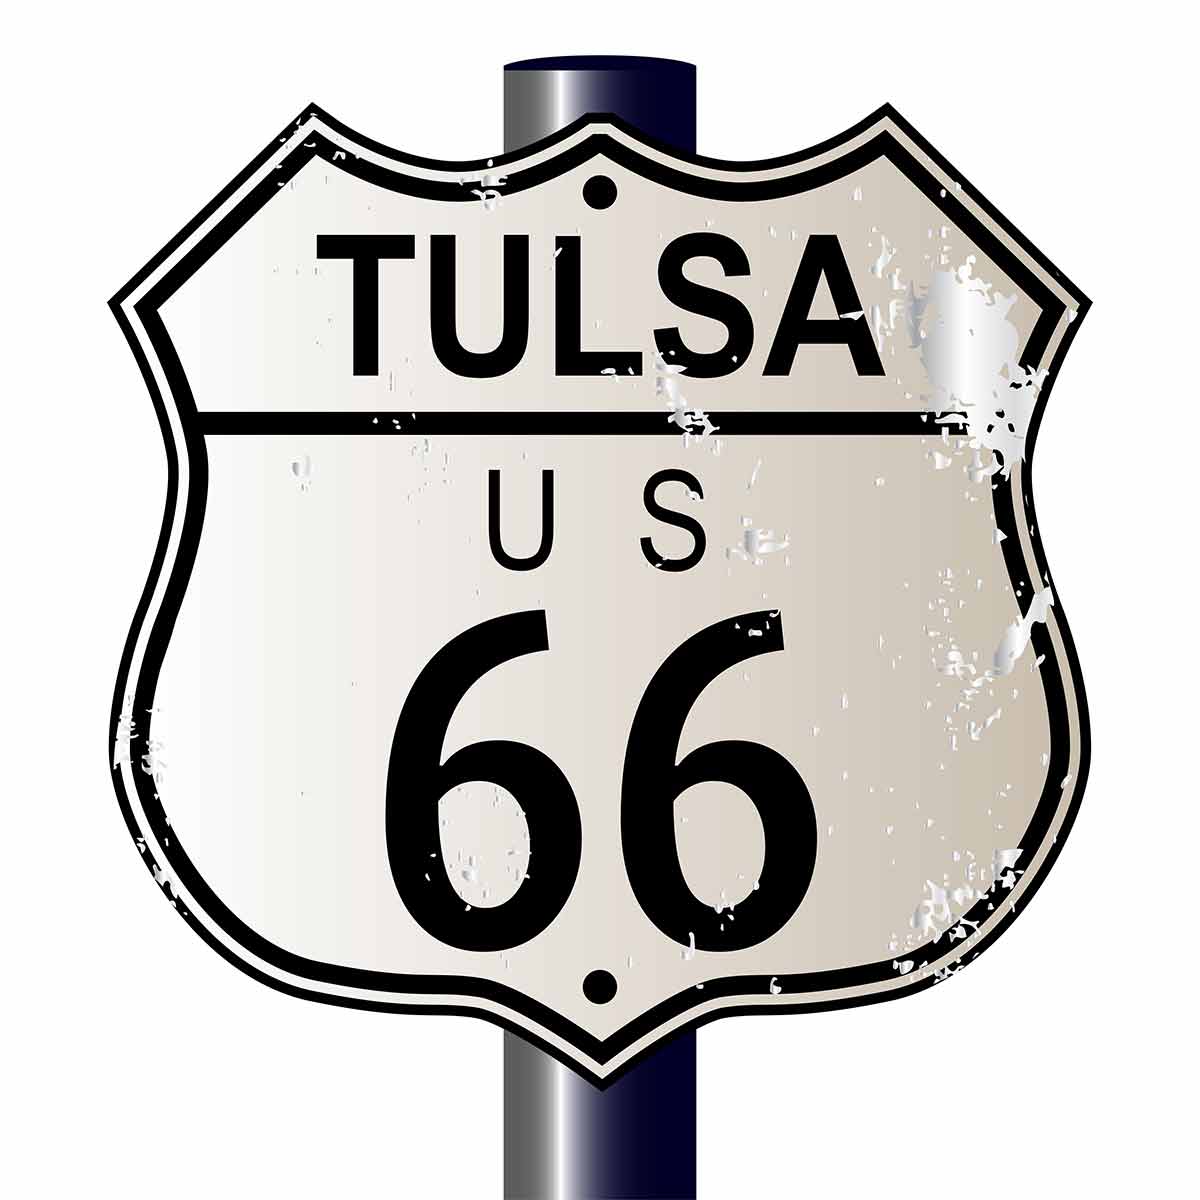 things to do this weekend in tulsa Tulsa Rosa Route 66 traffic sign over a white background and the legend ROUTE US 66.